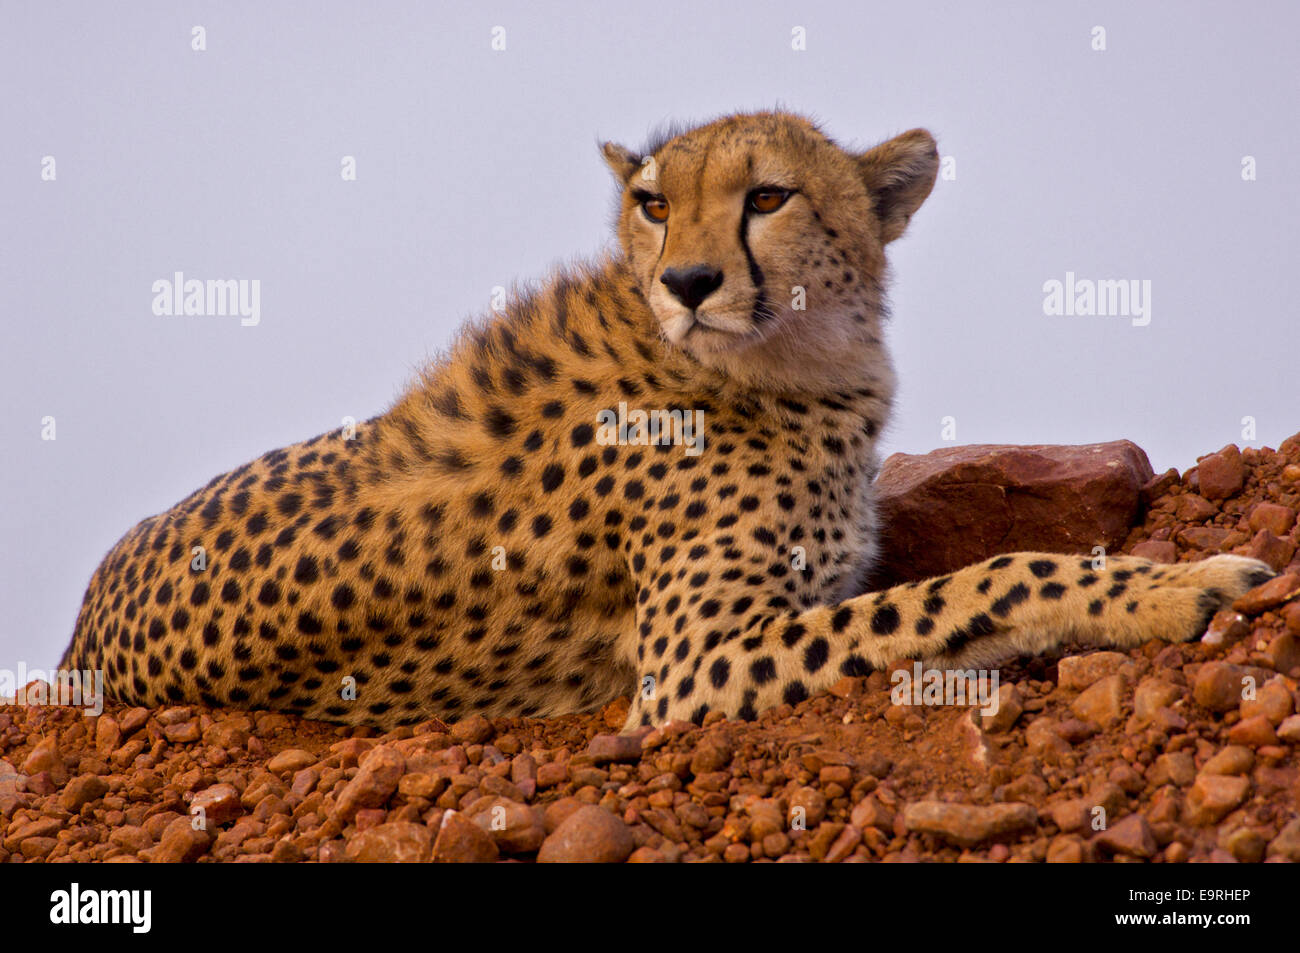 Cheetah (Acinonyx jubatus)   A superb portrait of a cheetah in its prime, lying on a mound, checking the horizon, in search of p Stock Photo